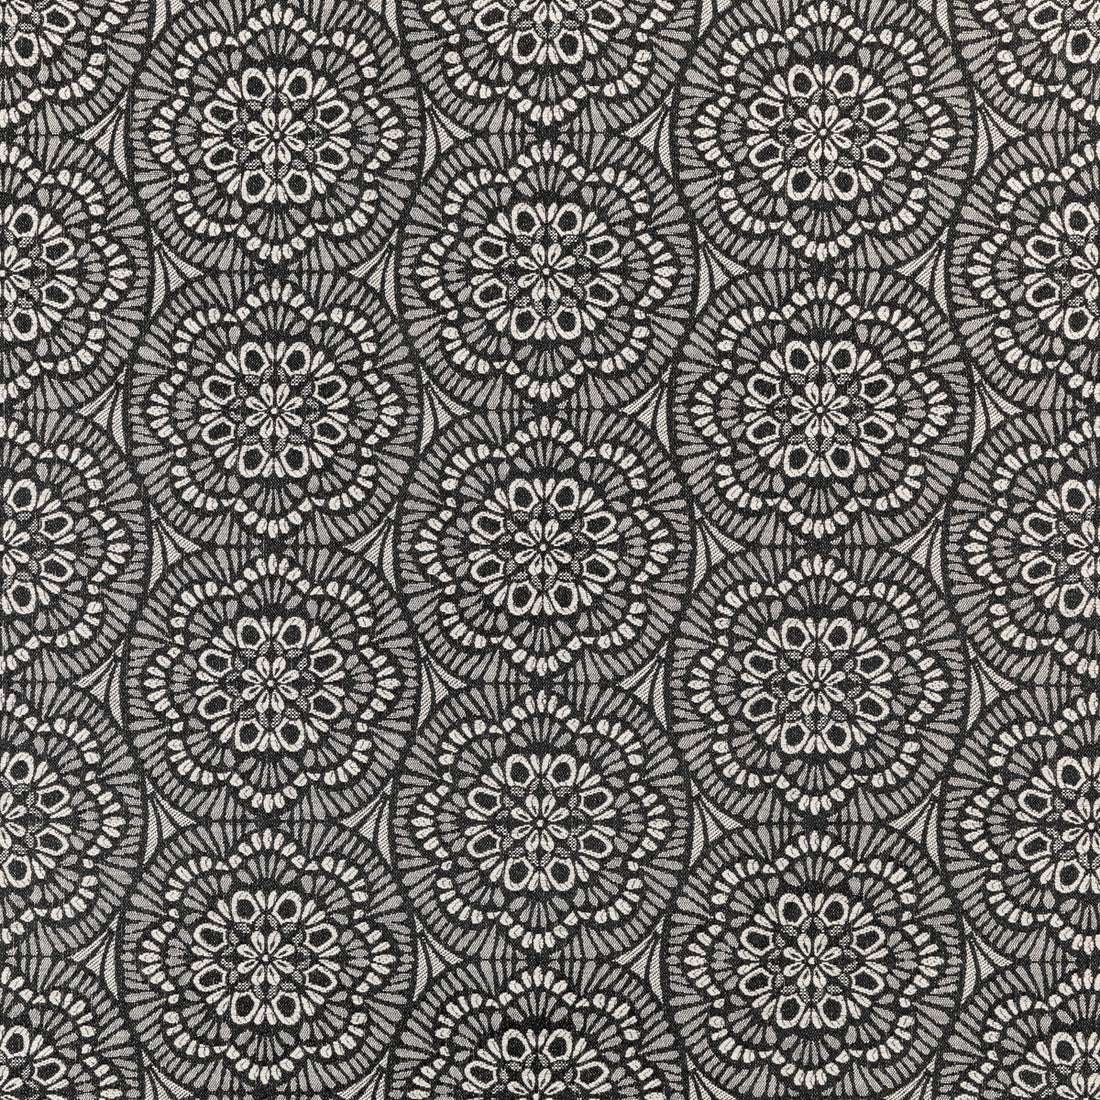 Tessa fabric in silhouette color - pattern 31544.81.0 - by Kravet Contract in the Gis Crypton collection